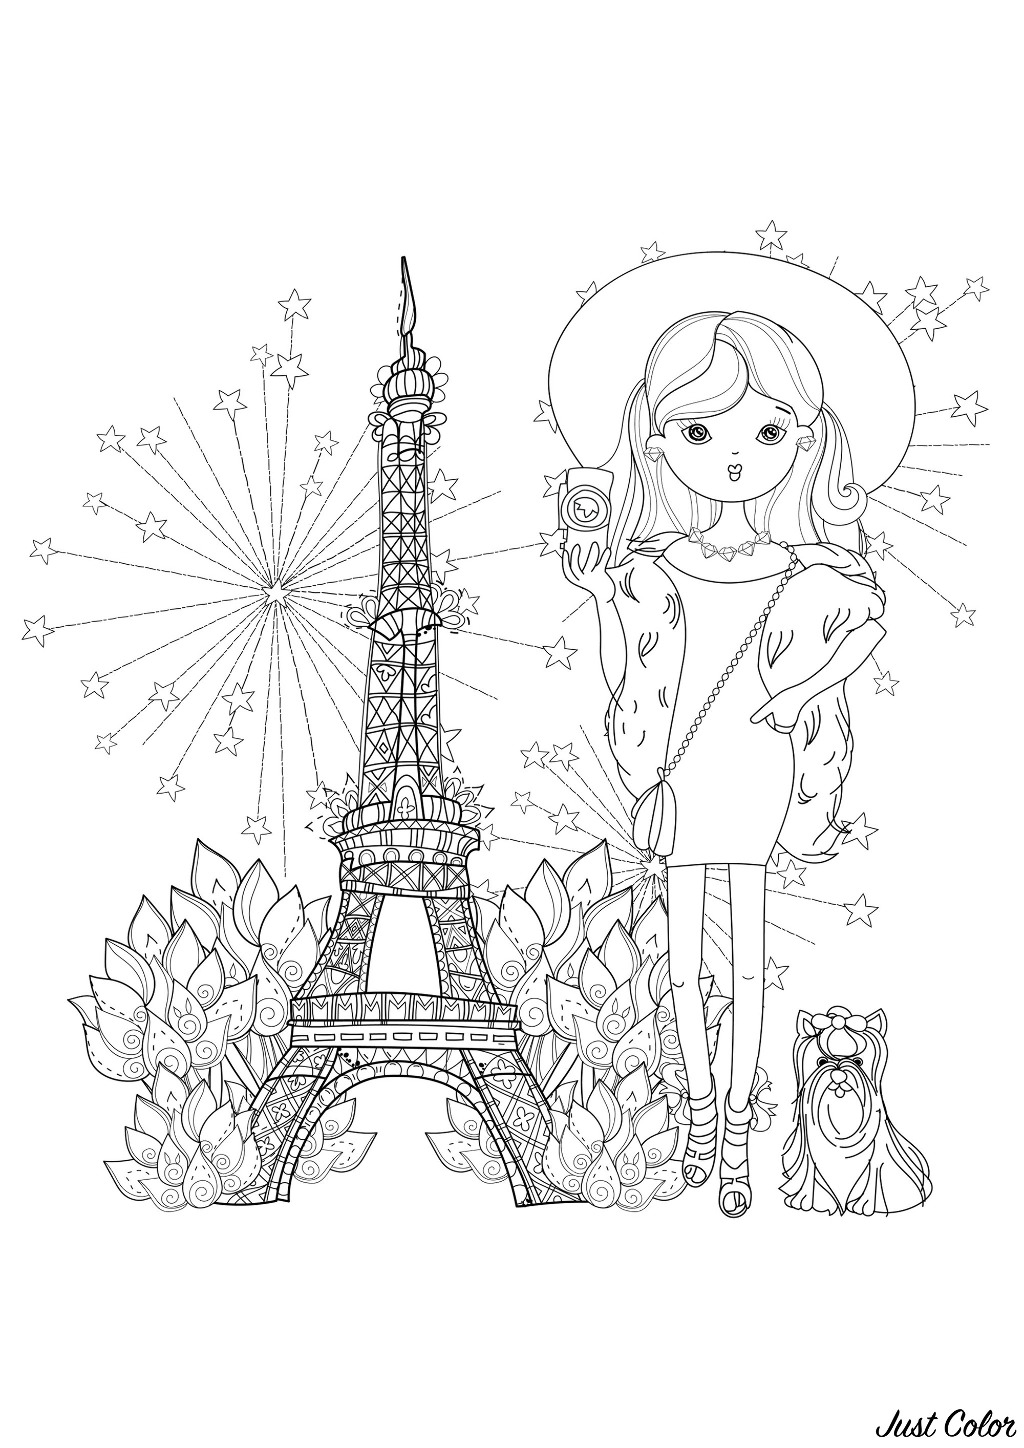 Young traveler with her little dog, and Eiffel Tower. Built in 1889 for the Exposition Universelle, the Eiffel Tower (Tour Eiffel) has become the main symbol of Paris, and even of France.